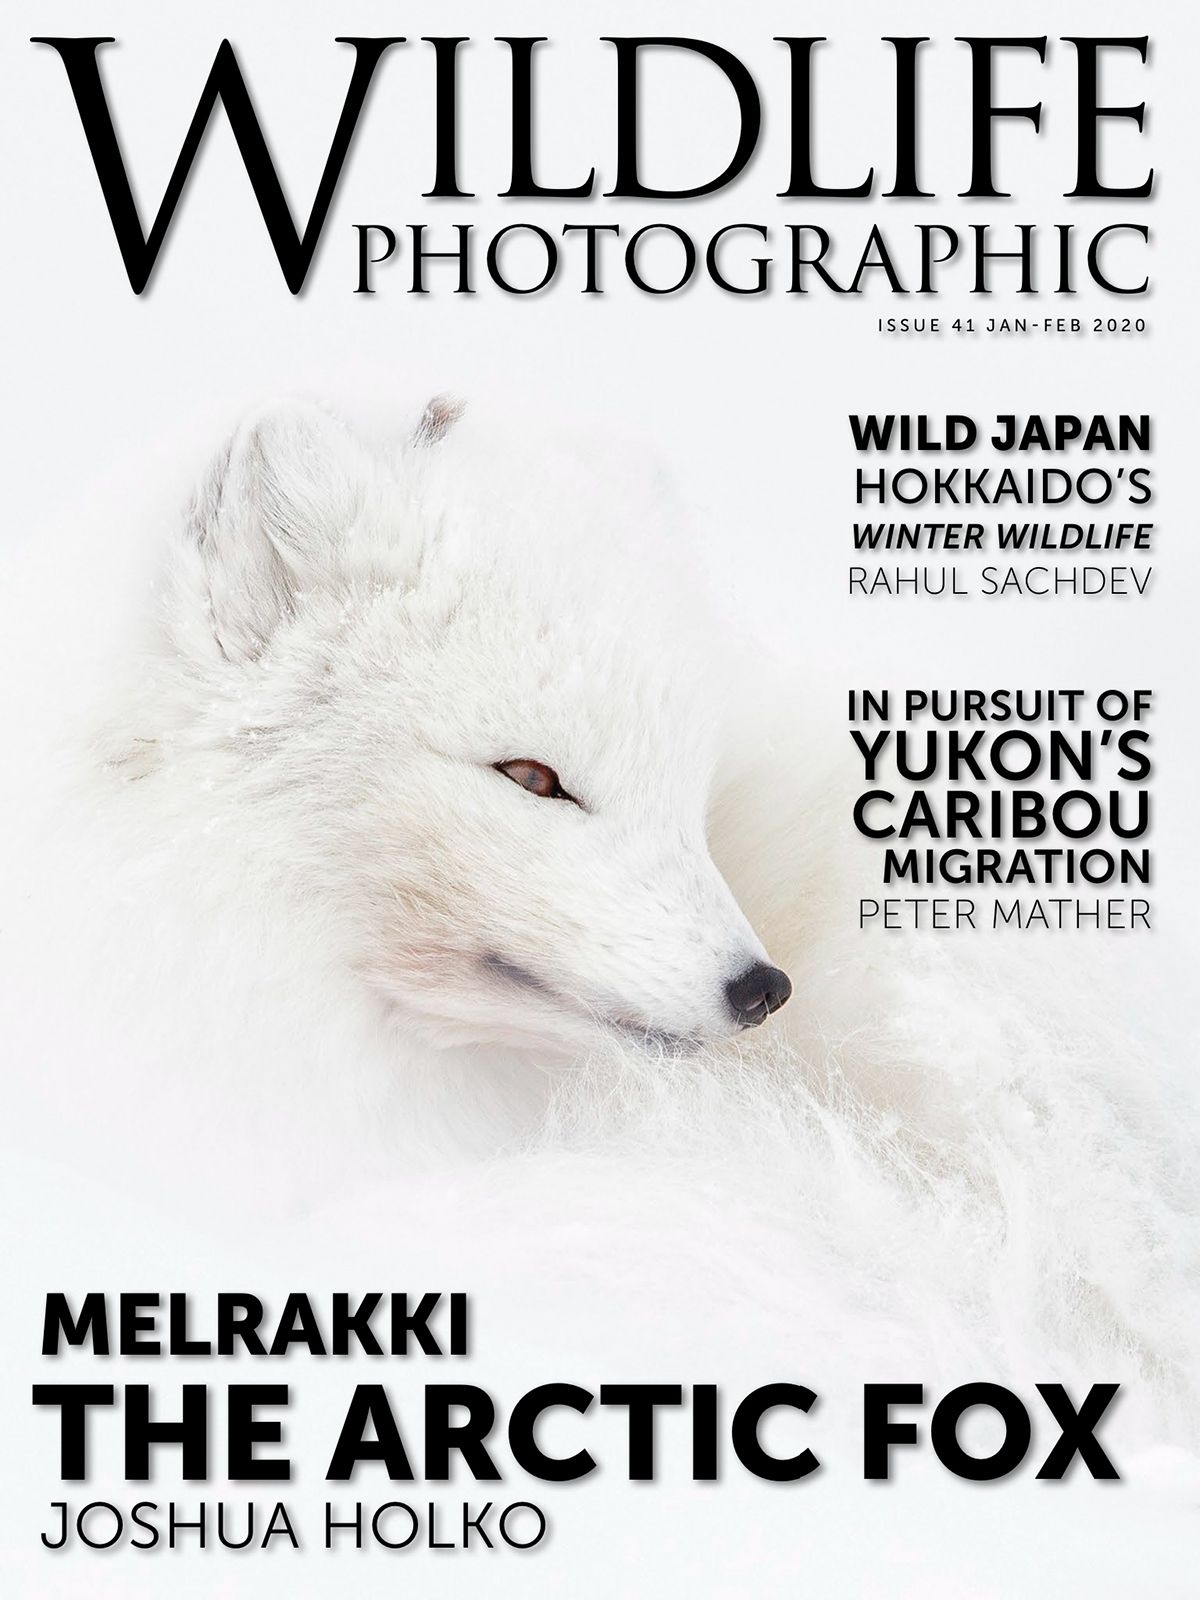 Cover photograph by Joshua Holko